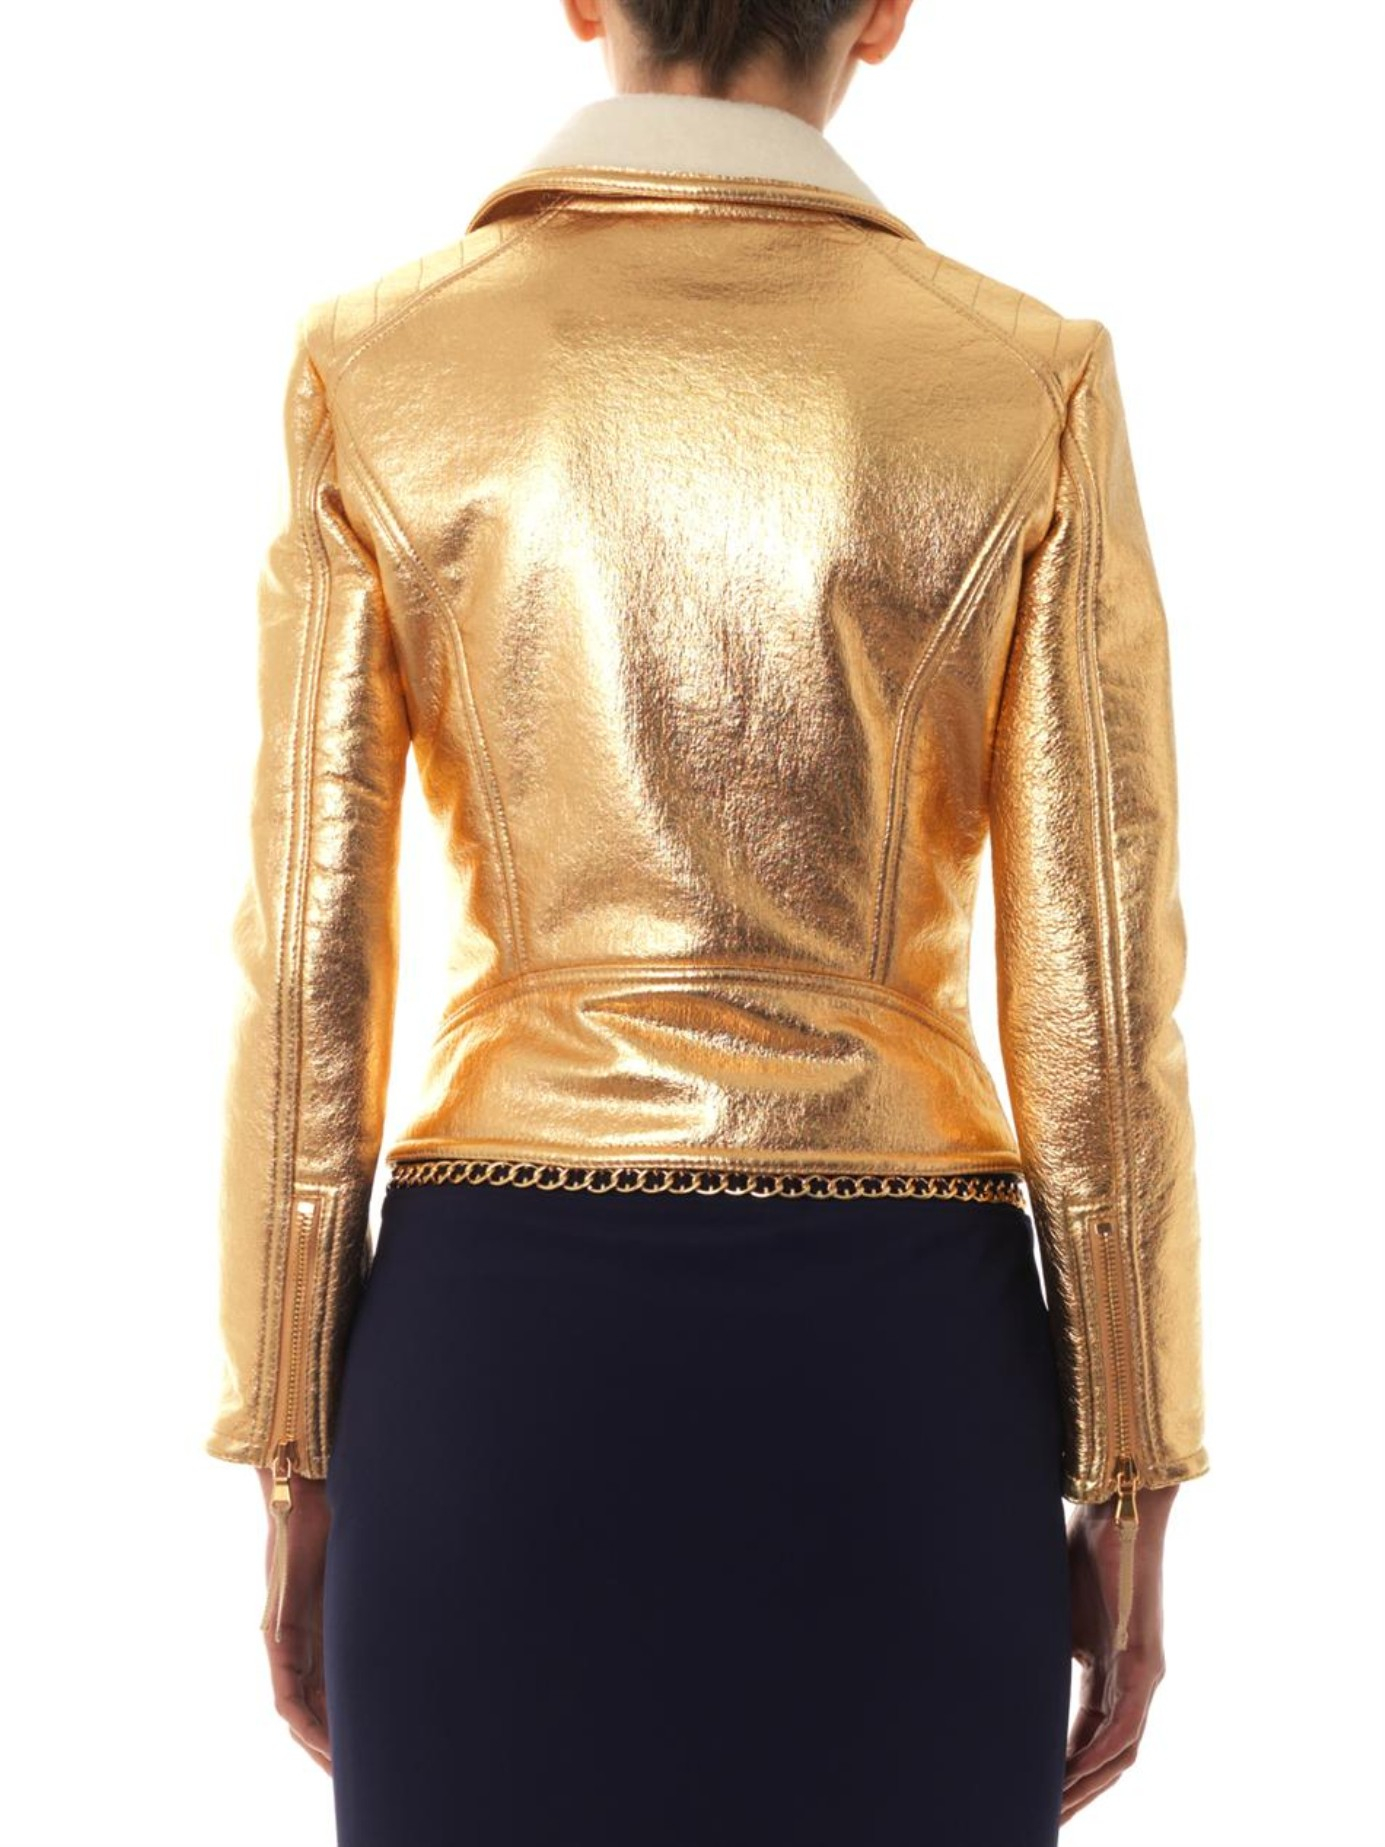 Moschino Lamé Shearling-Lined Biker Jacket in Gold (Metallic) - Lyst